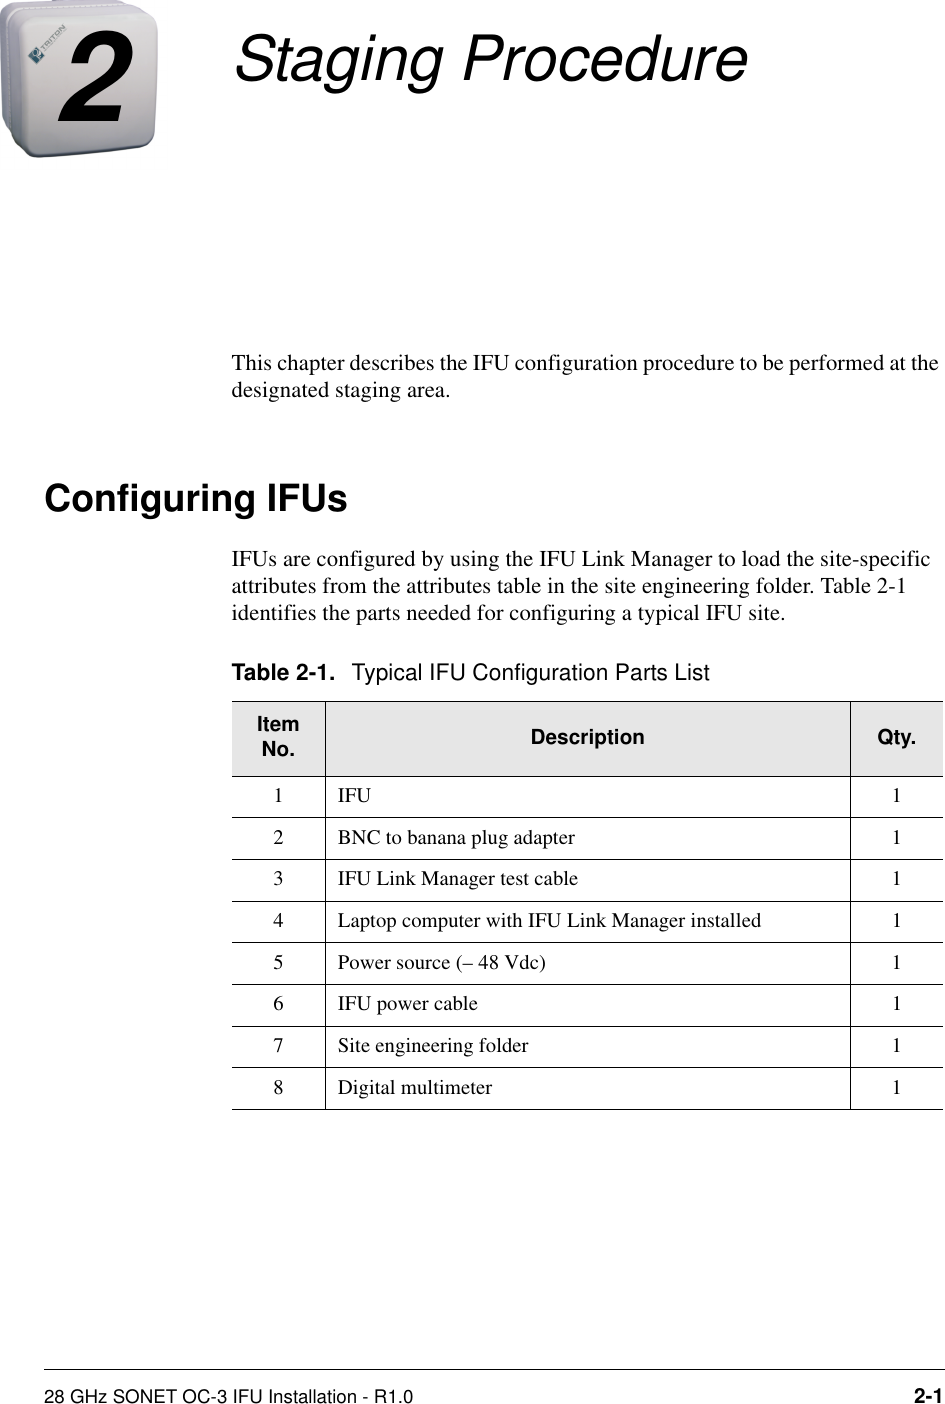 28 GHz SONET OC-3 IFU Installation - R1.0 2-12Staging ProcedureThis chapter describes the IFU configuration procedure to be performed at the designated staging area.Configuring IFUsIFUs are configured by using the IFU Link Manager to load the site-specific attributes from the attributes table in the site engineering folder. Table 2-1 identifies the parts needed for configuring a typical IFU site.Table 2-1. Typical IFU Configuration Parts ListItem No. Description Qty.1IFU 12 BNC to banana plug adapter 13 IFU Link Manager test cable  14 Laptop computer with IFU Link Manager installed 15 Power source (– 48 Vdc)  16 IFU power cable 17 Site engineering folder 18 Digital multimeter 1